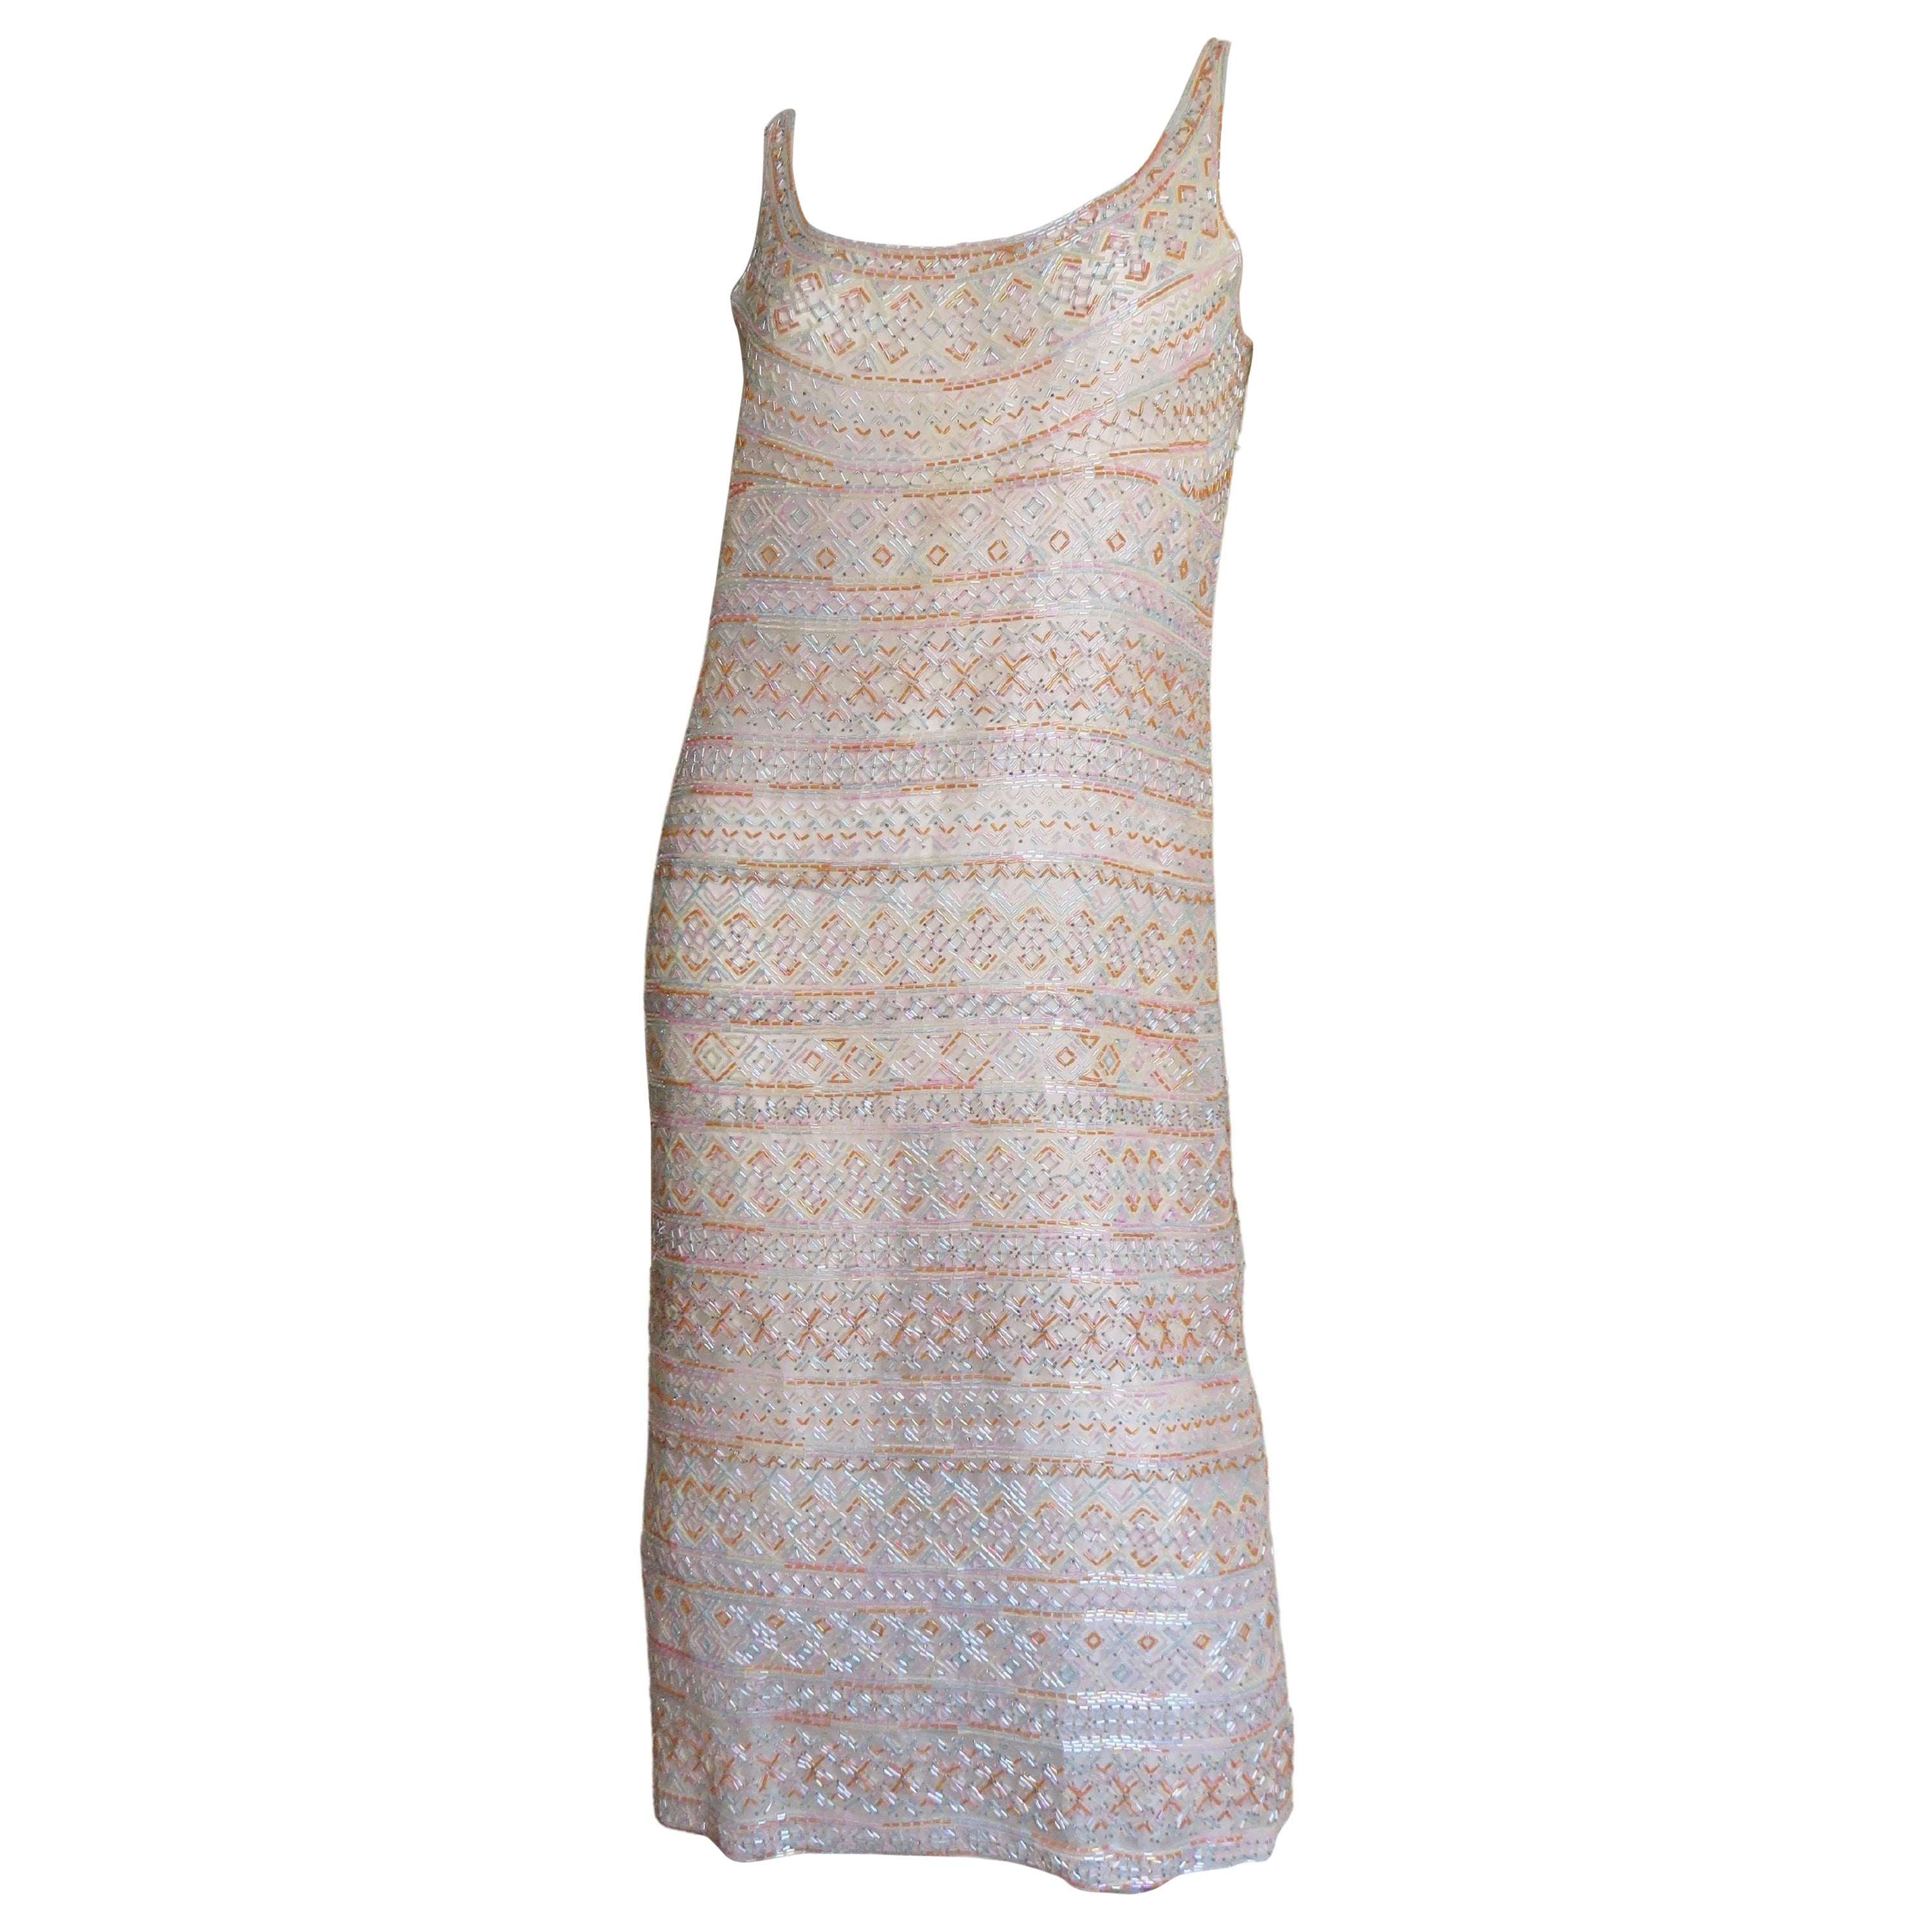  Halston 1970s Documented Beaded Dress  For Sale